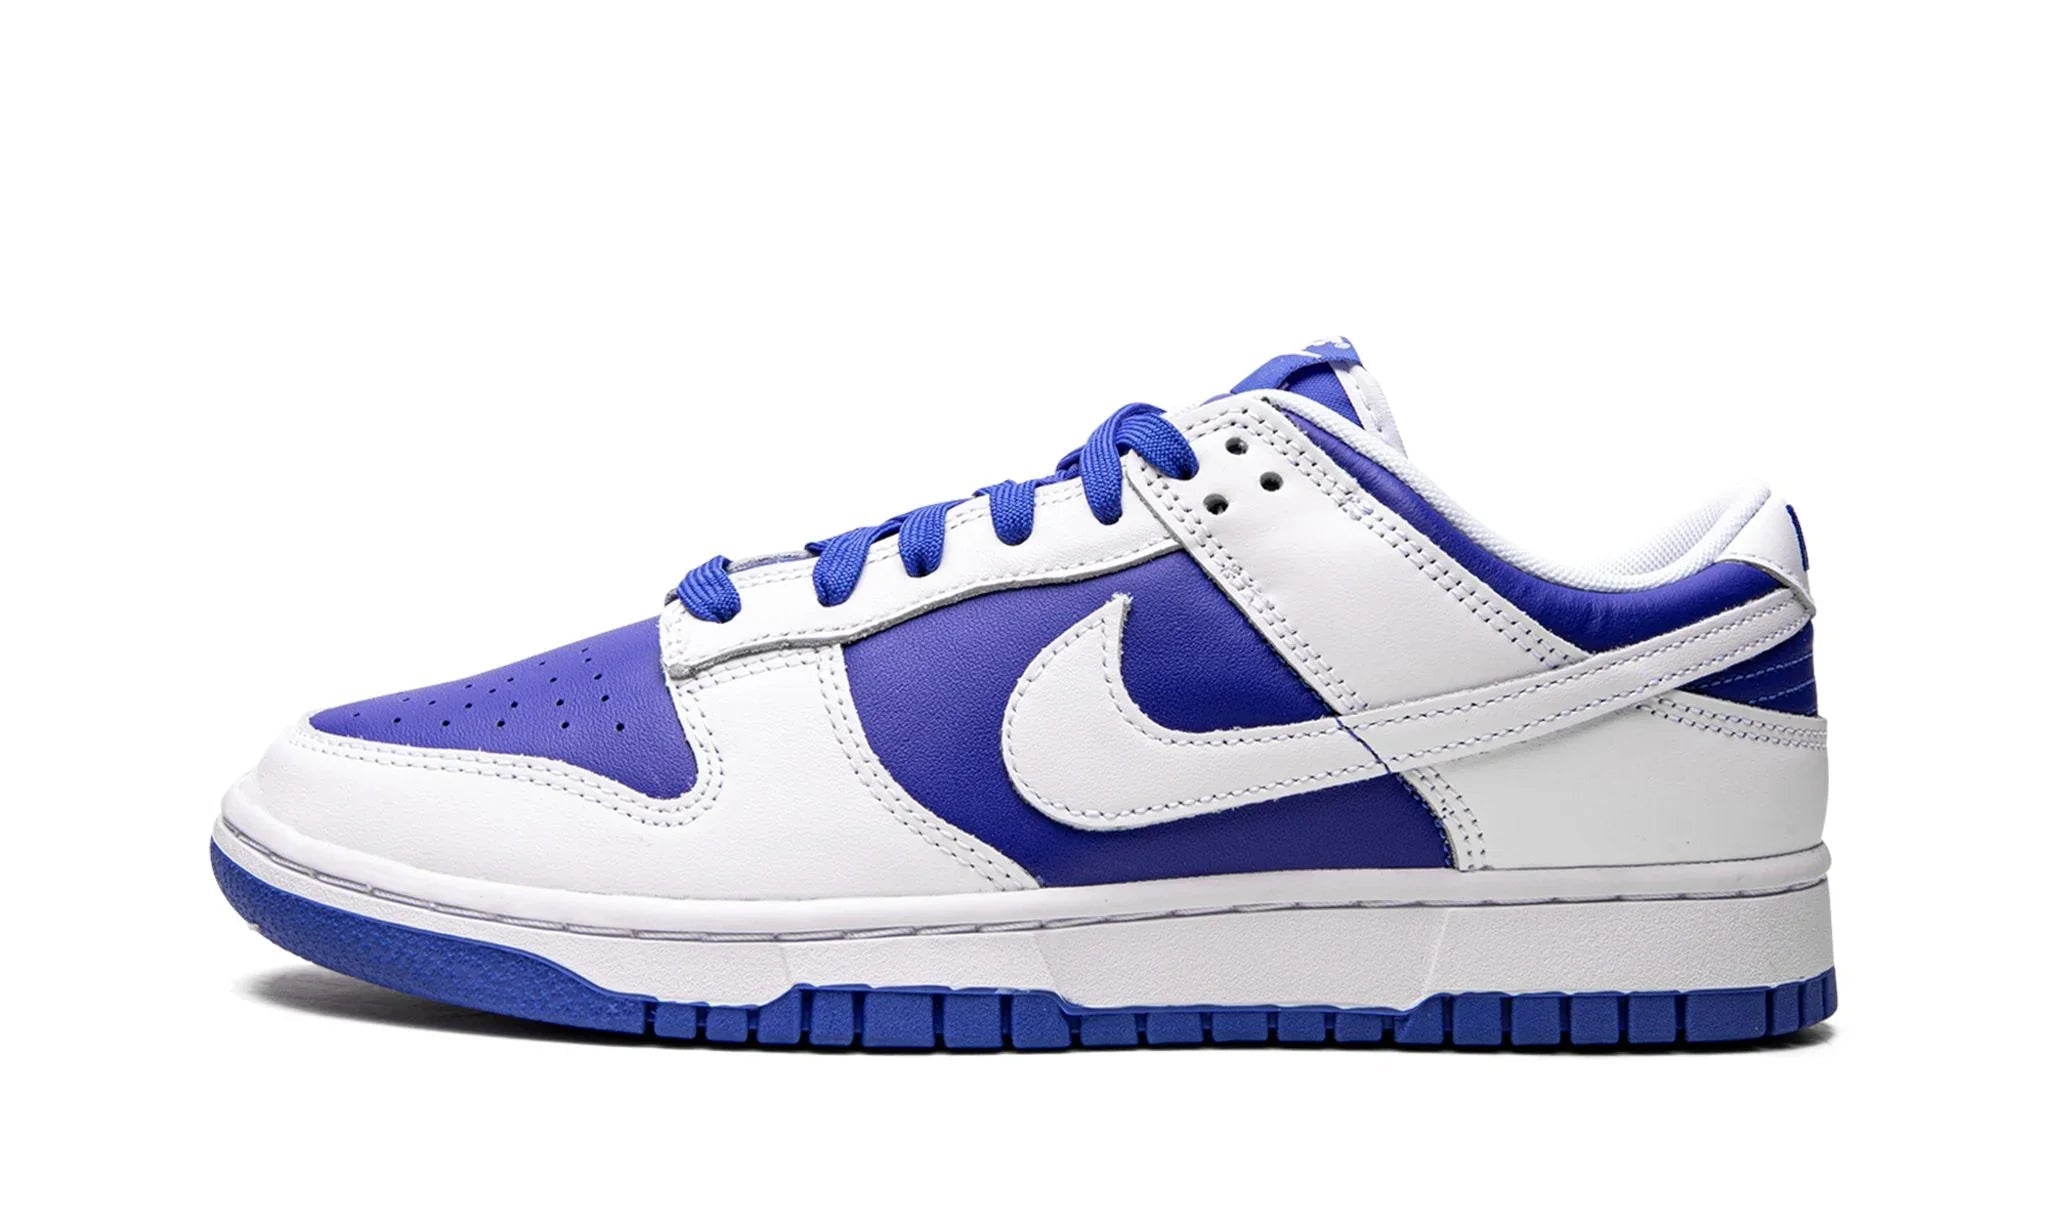 Nike Dunk Low "Racer Blue White" - DD1391-401 - Sneakers